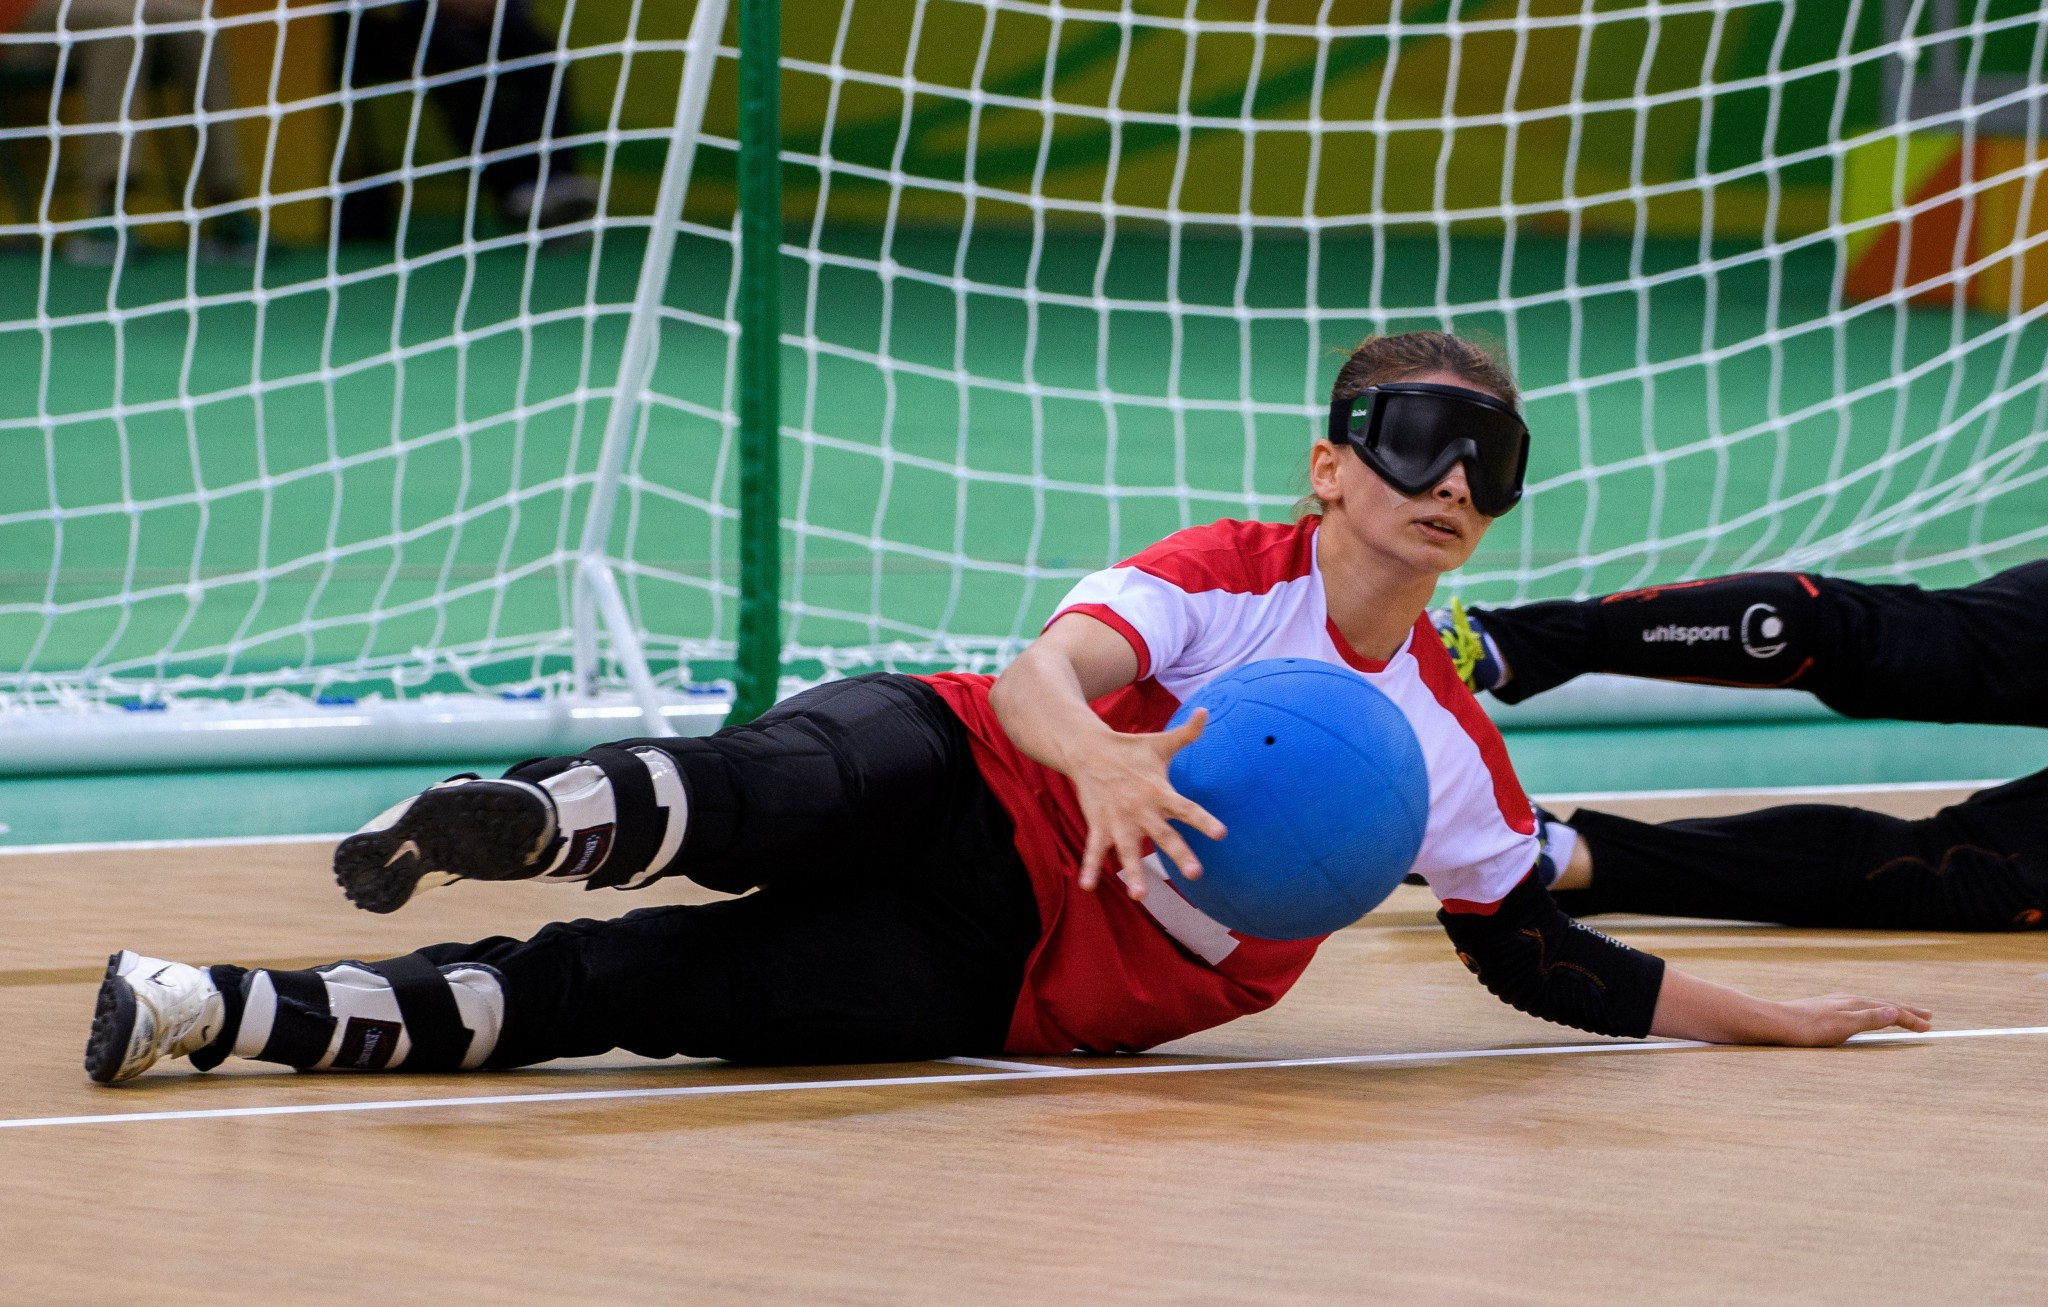 Turkey's women's goalball team won the best team accolade after claiming their maiden Paralympic title at Rio 2016 ©Getty Images